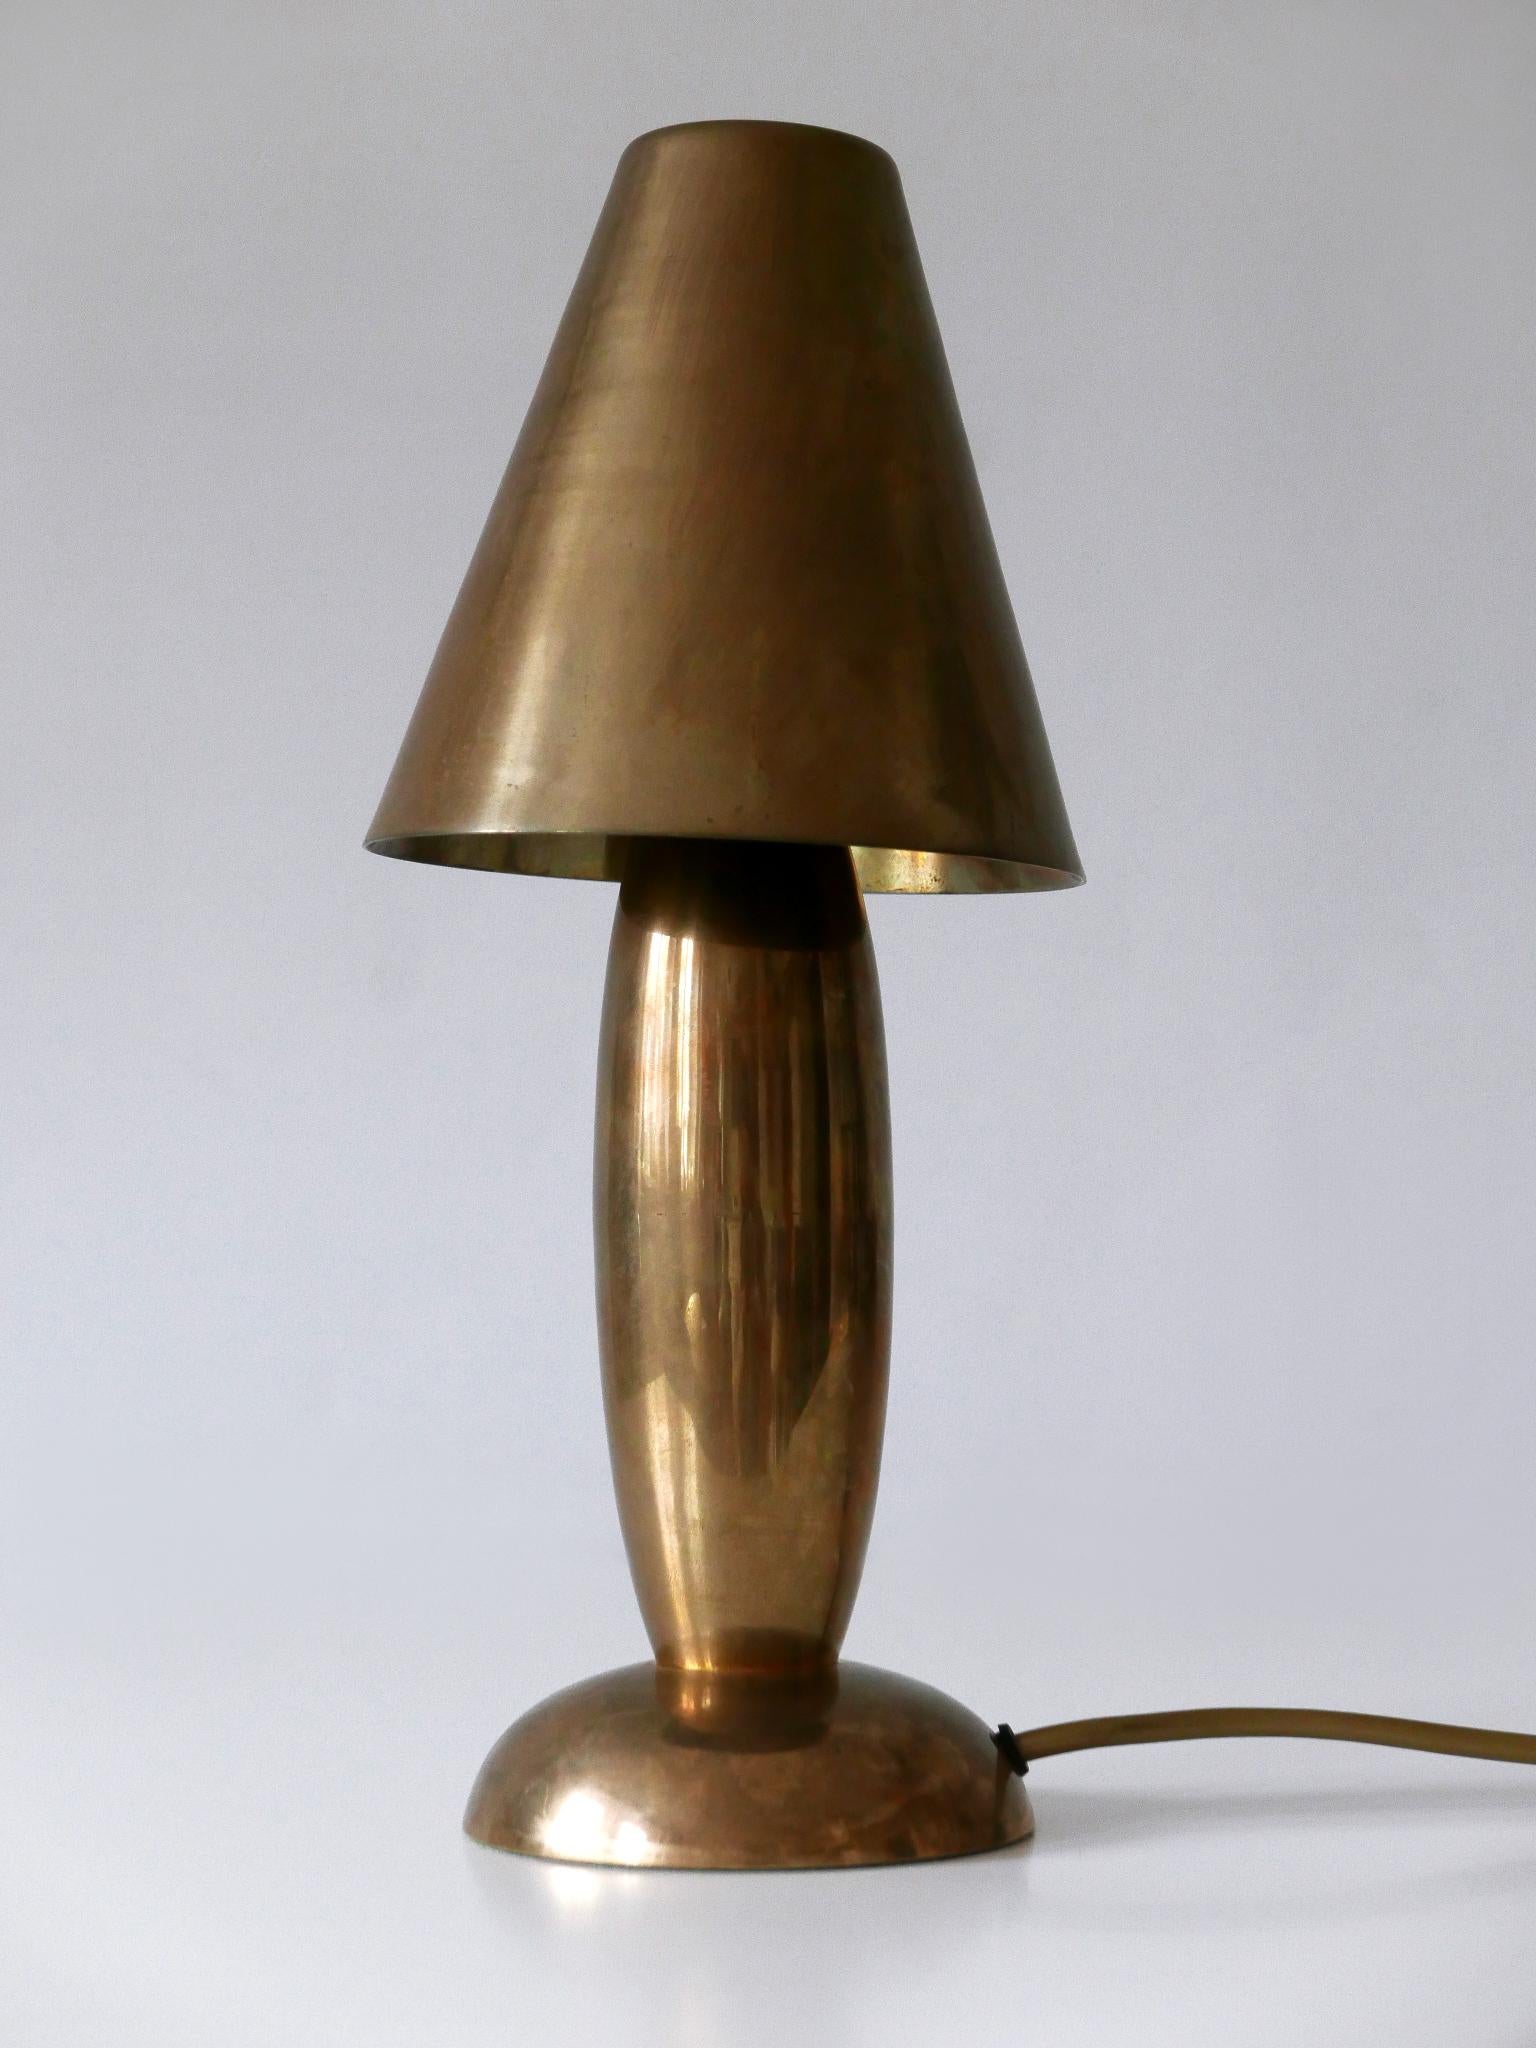 Late 20th Century Rare & Lovely Mid-Century Modern Brass Side Table Lamp by Lambert Germany 1970s